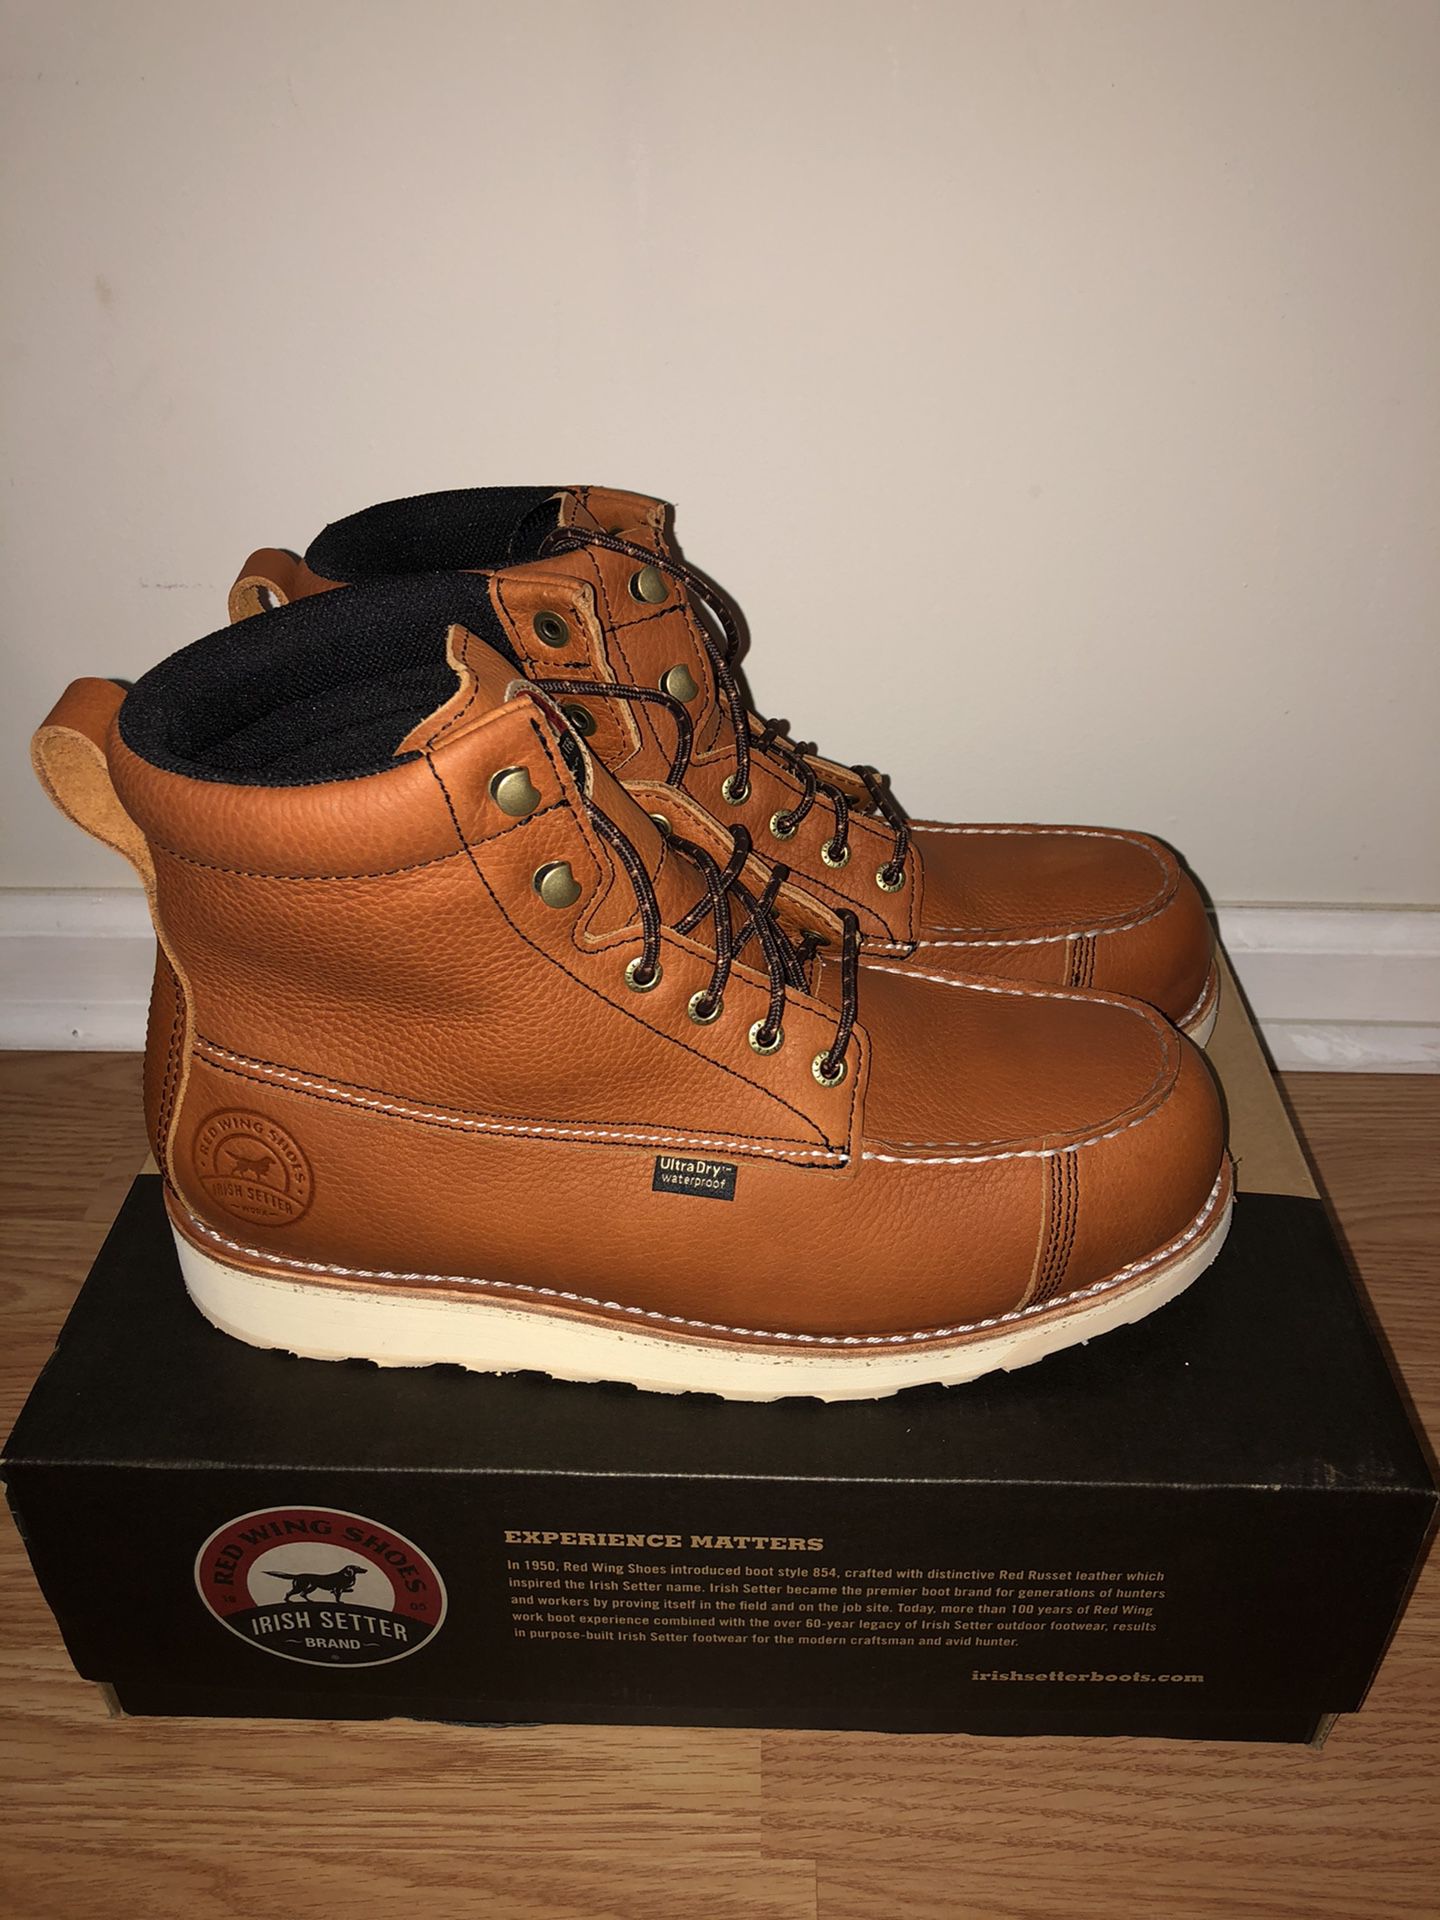 Red Wing Irish Setter Work Boots